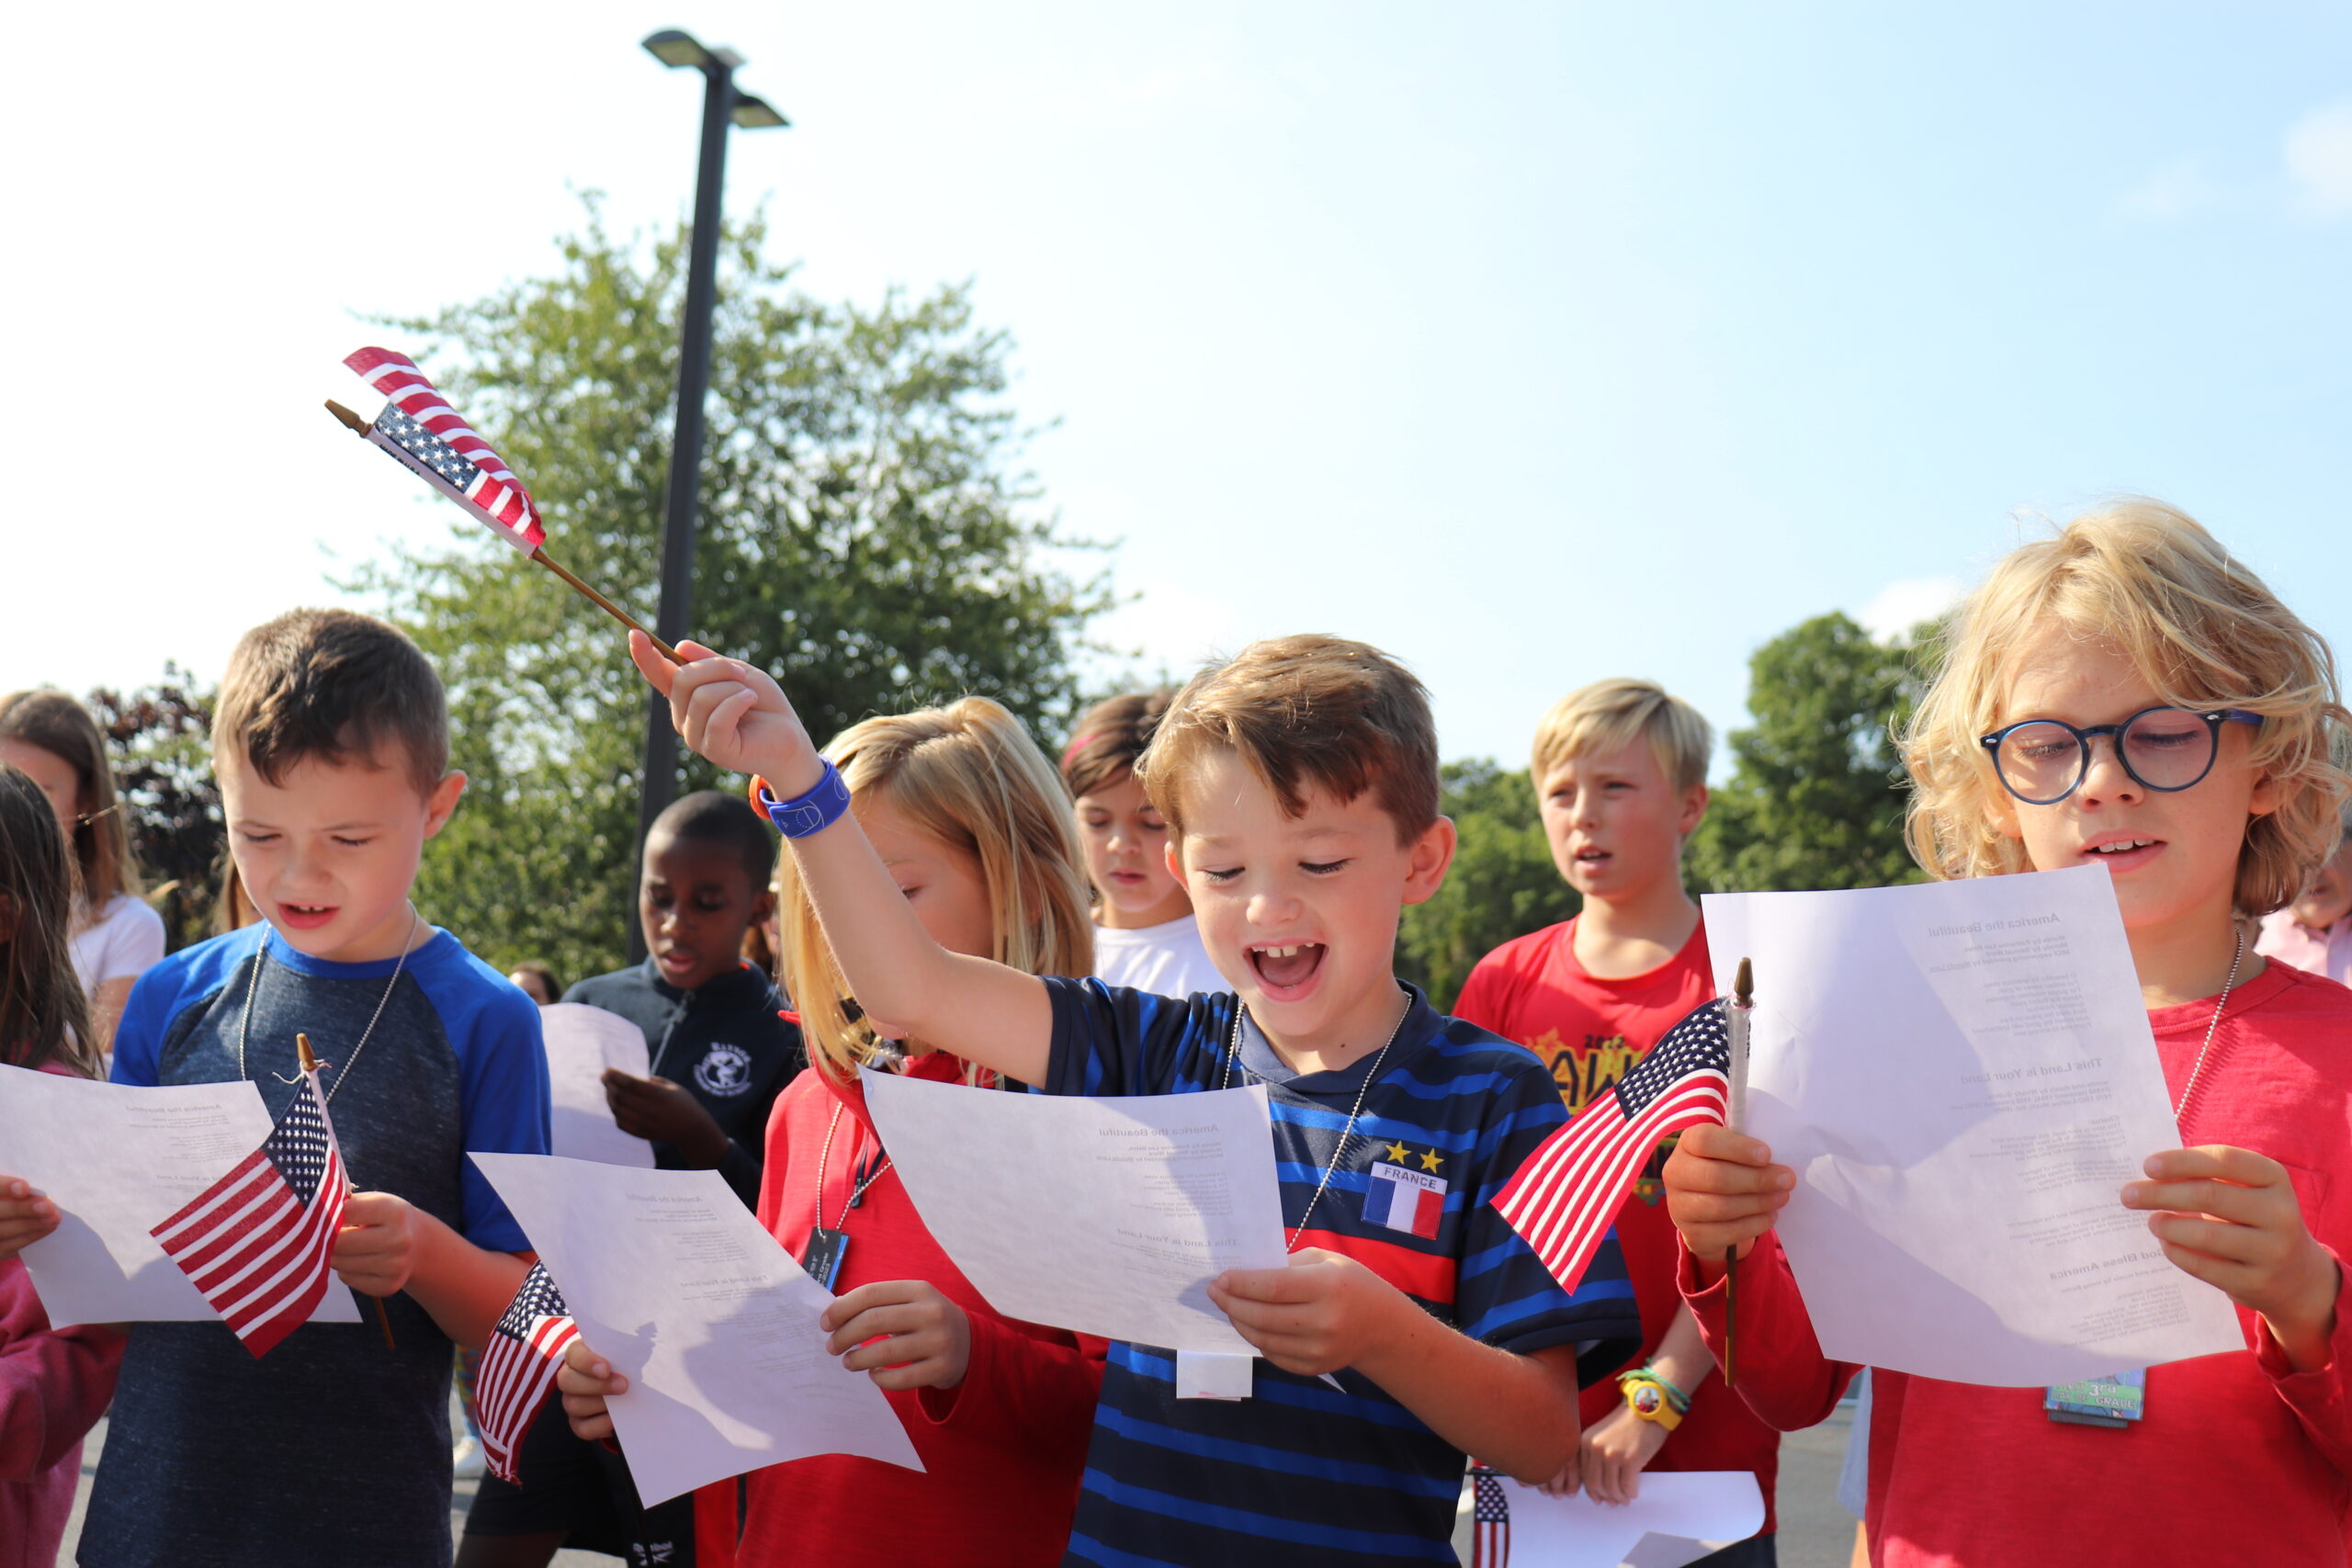 On Friday, September 9, the students, staff, and families of Raynor Country Day School hosted its annual Patriot Day Ceremony to honor the events of September 11. Christopher Lynch and his third-grade classmates sing patriotic songs. COURTESY RAYNOR COUNTRY DAY SCHOOL